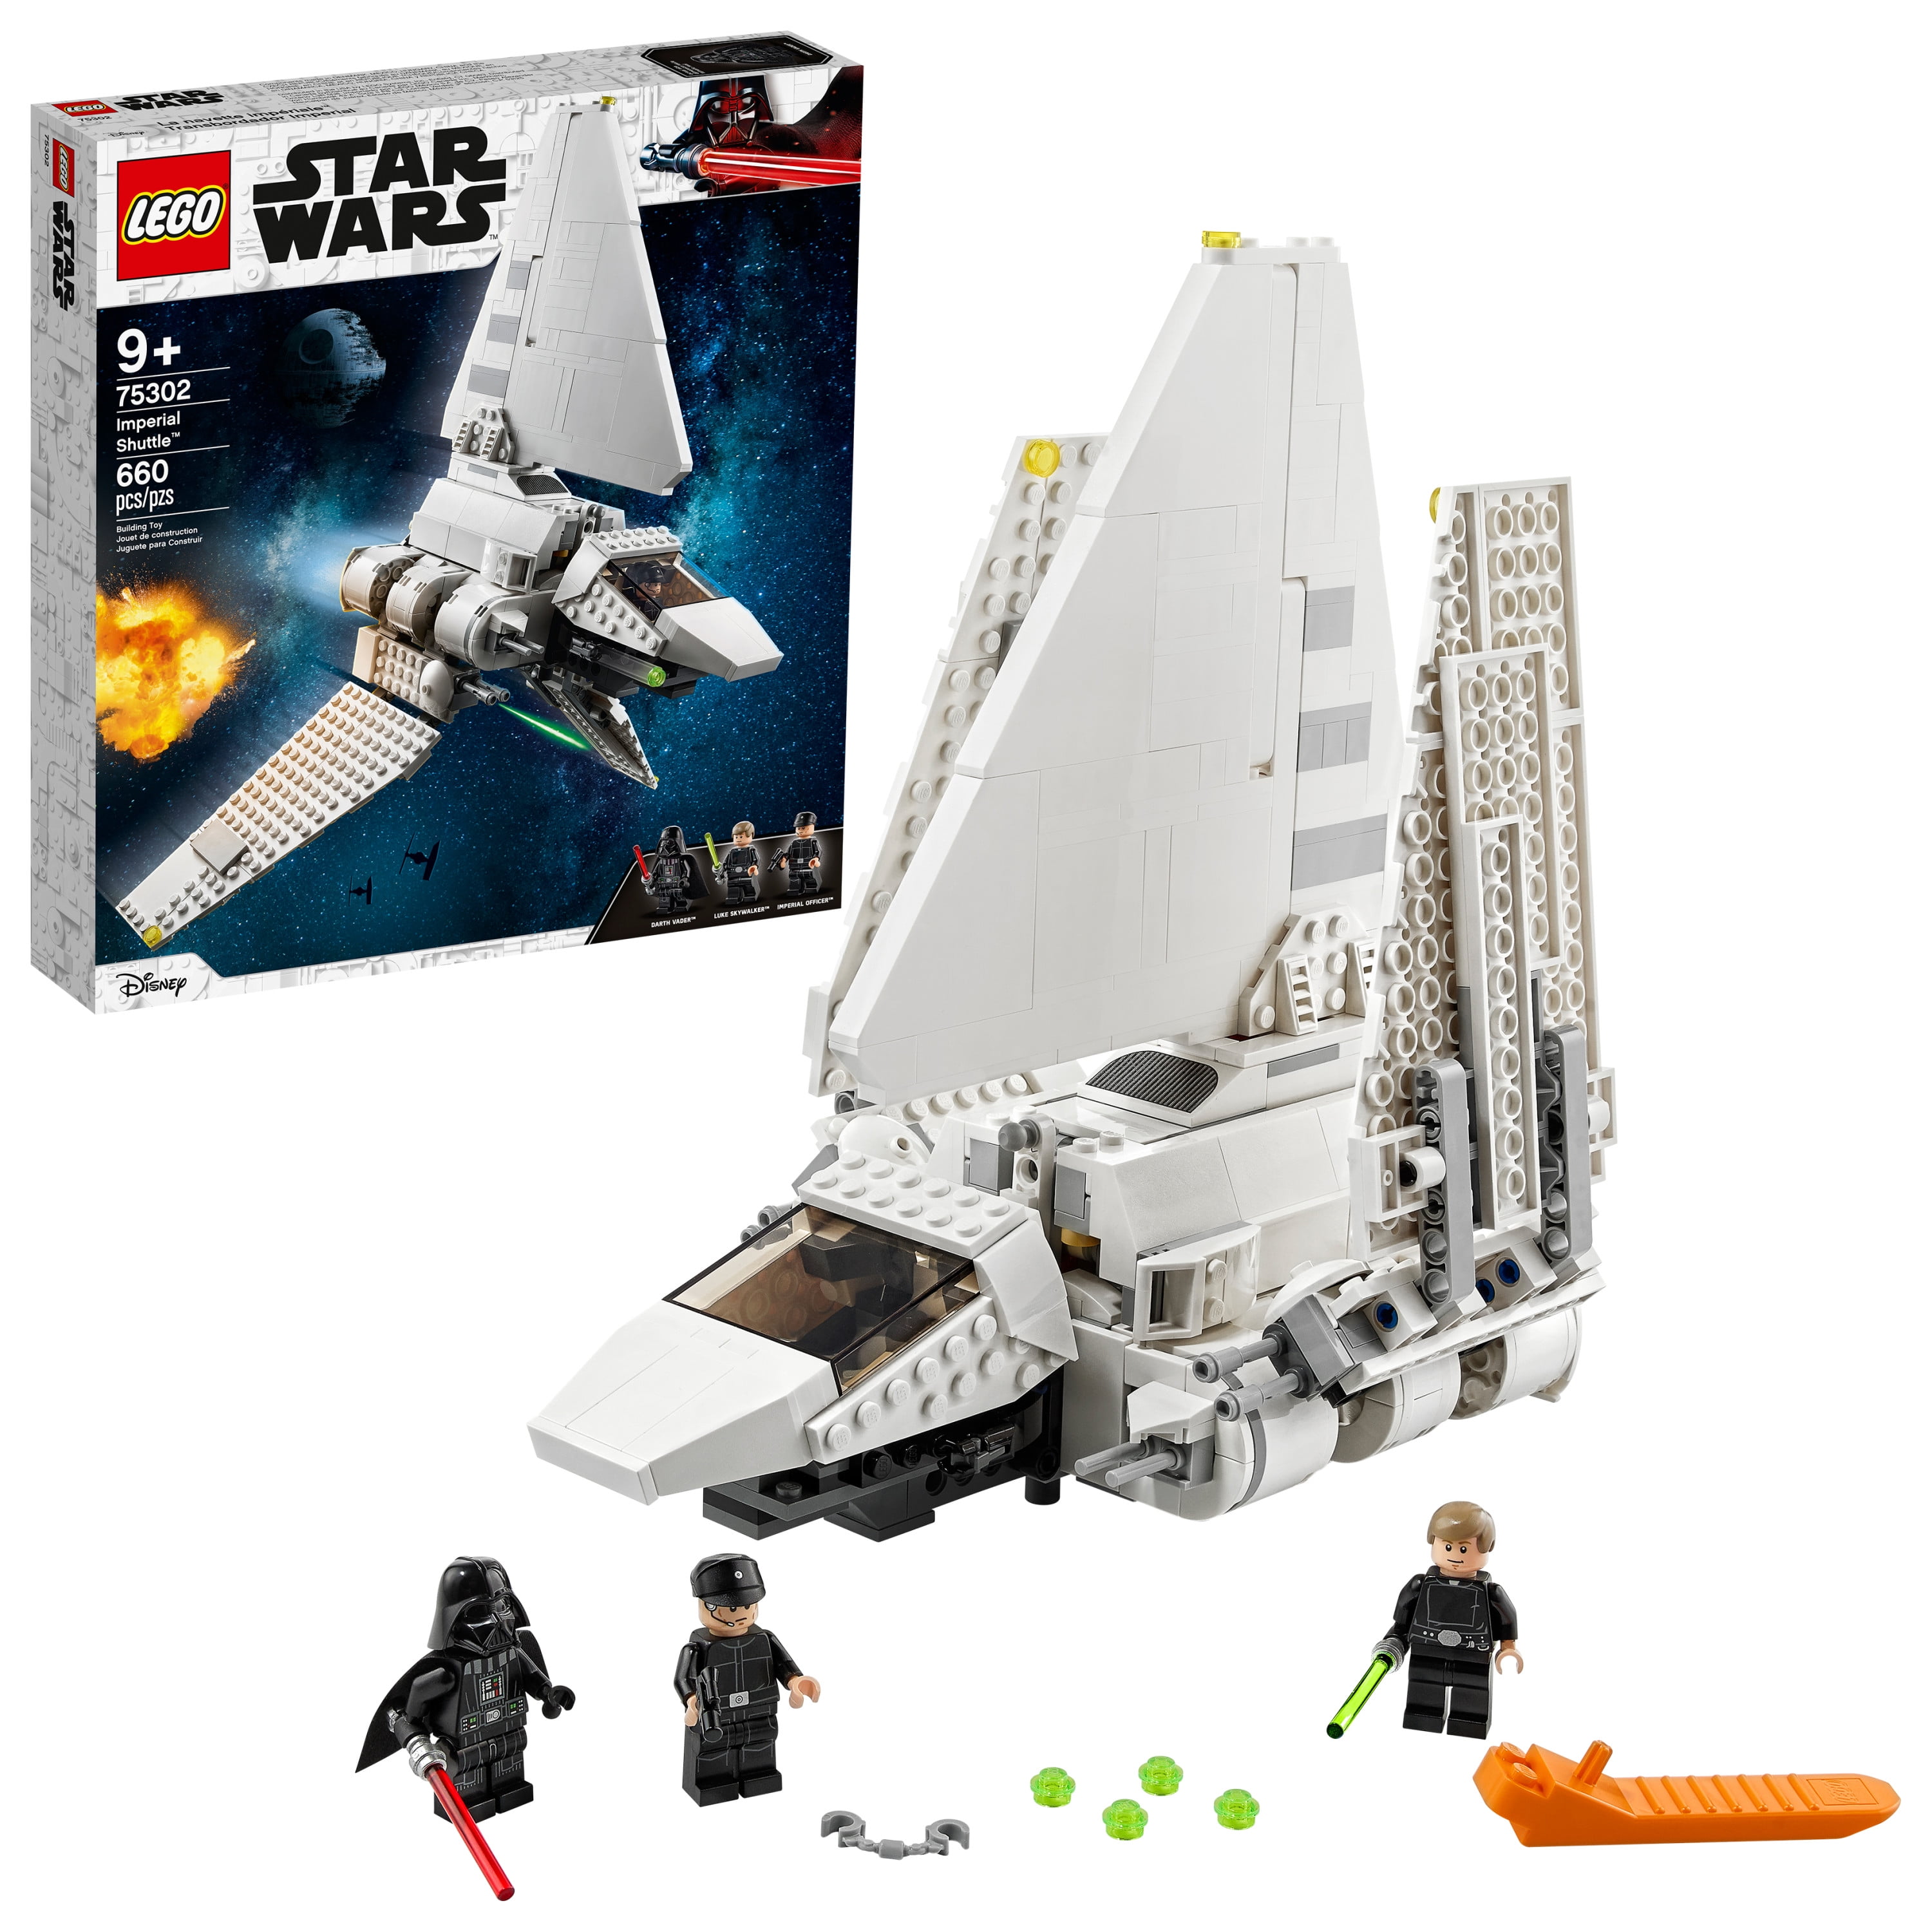 sadel Abnorm kost LEGO Star Wars Imperial Shuttle 75302 Building Toy (660 Pieces) -  Walmart.com